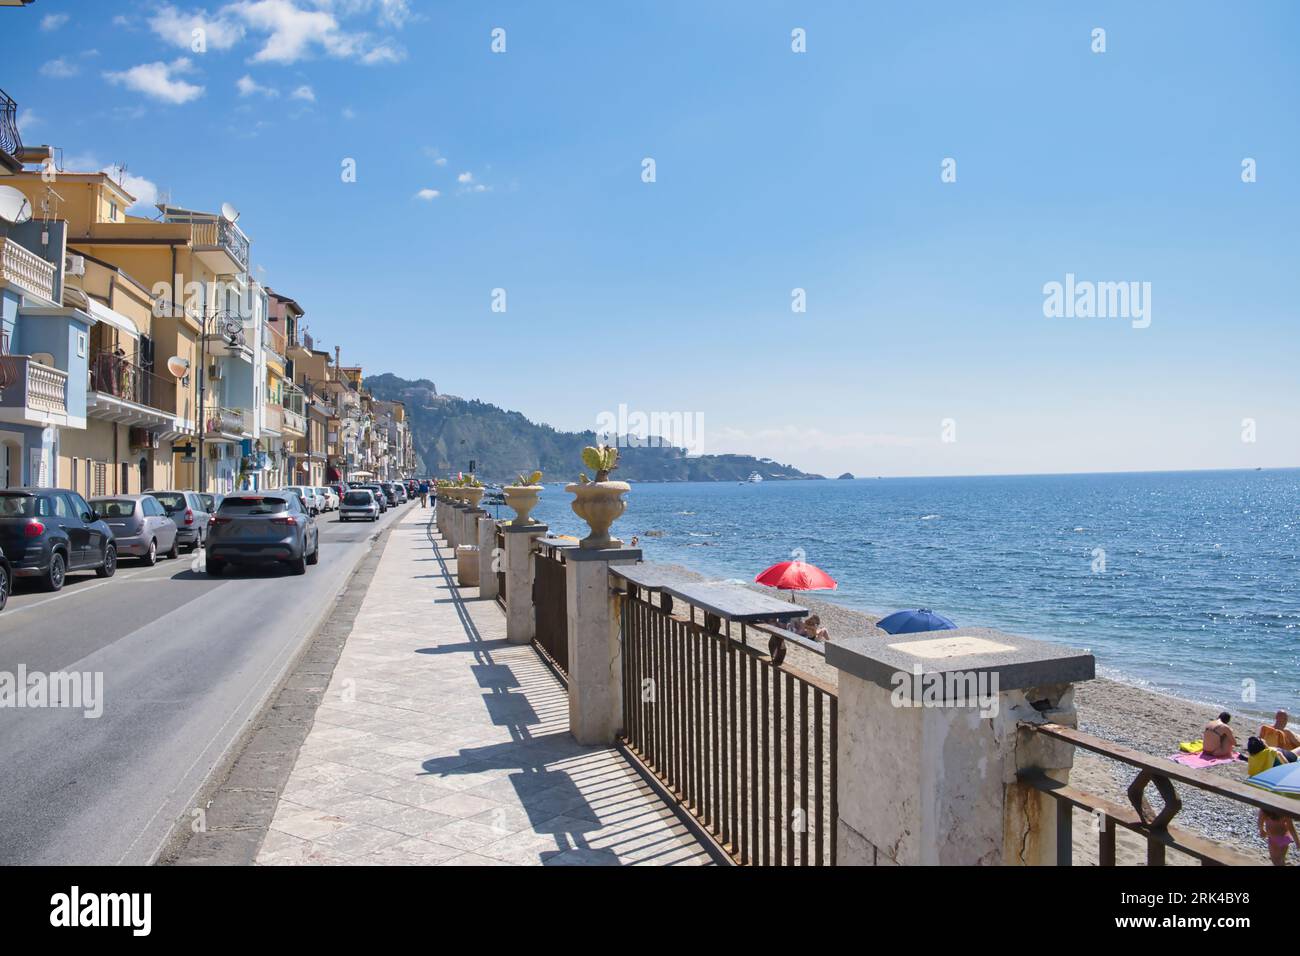 Street, promenade in the place called Giardini Naxos which is near Taormina in Sicily, Italy Stock Photo